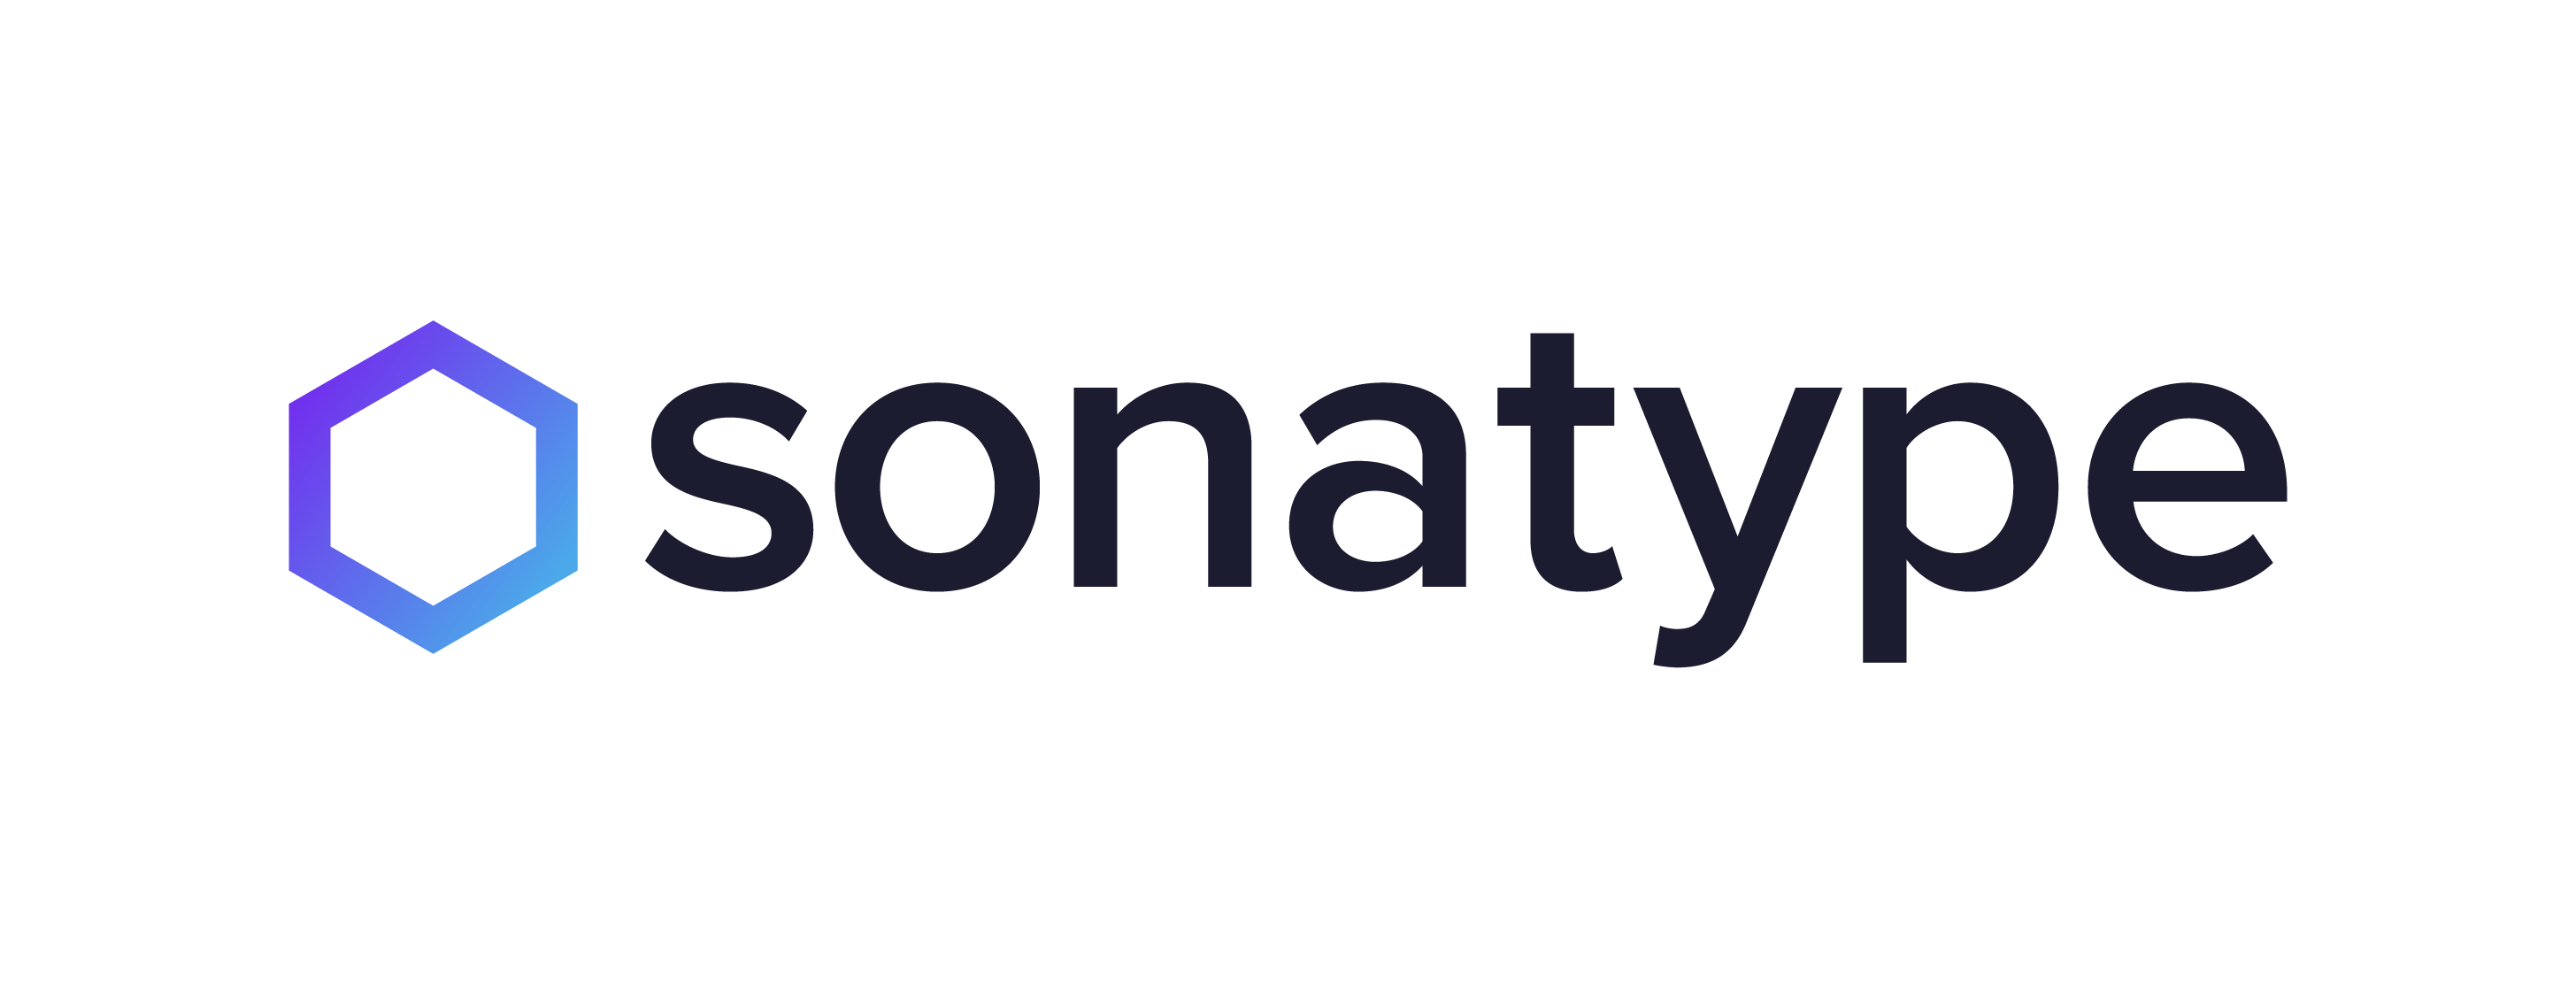 Sonatype Adds End-to